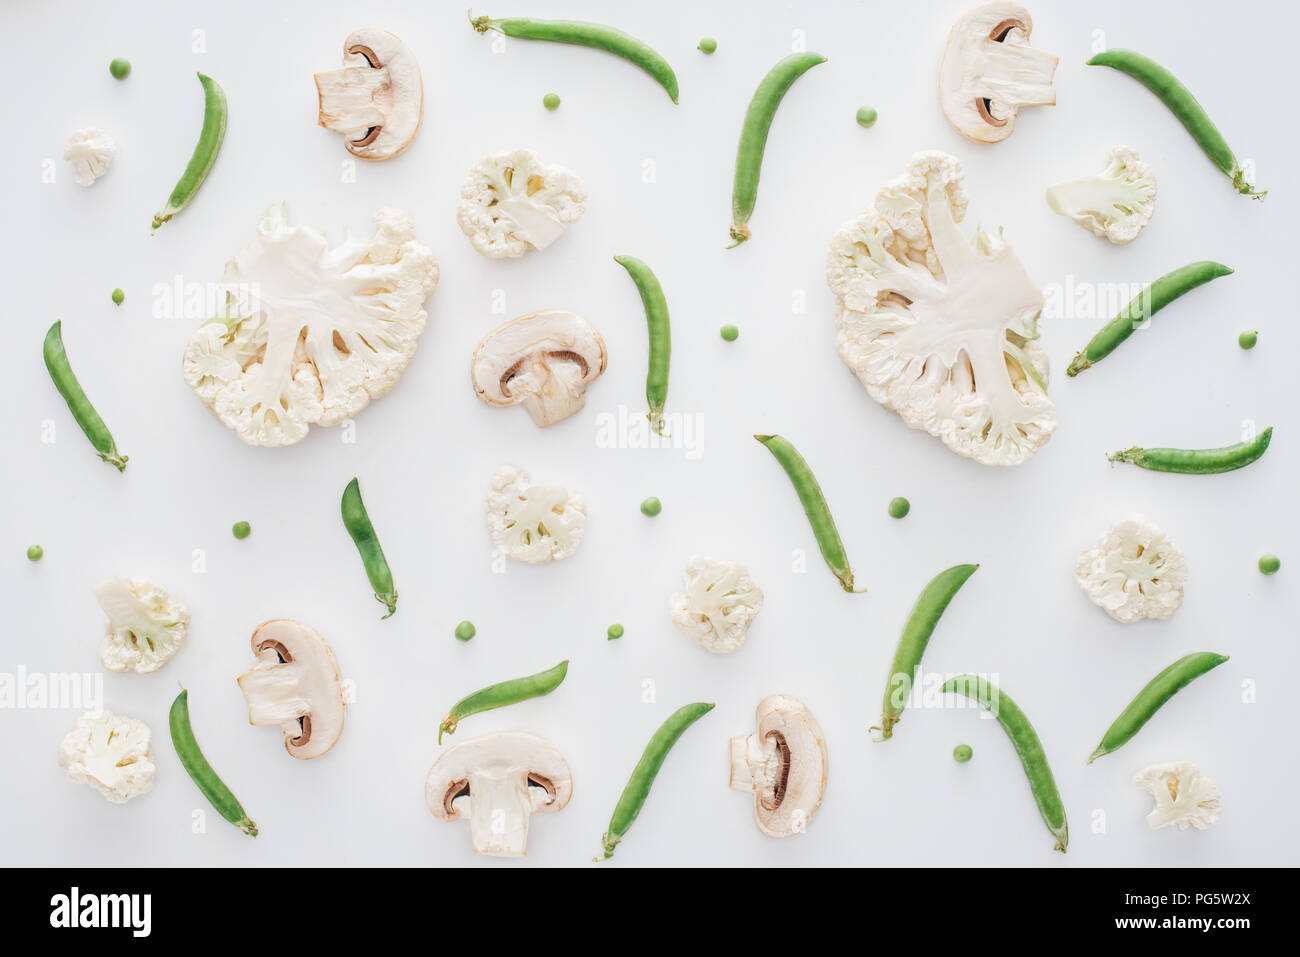 top view of fresh sliced cauliflower, mushrooms and green peas isolated on white background Stock Photo